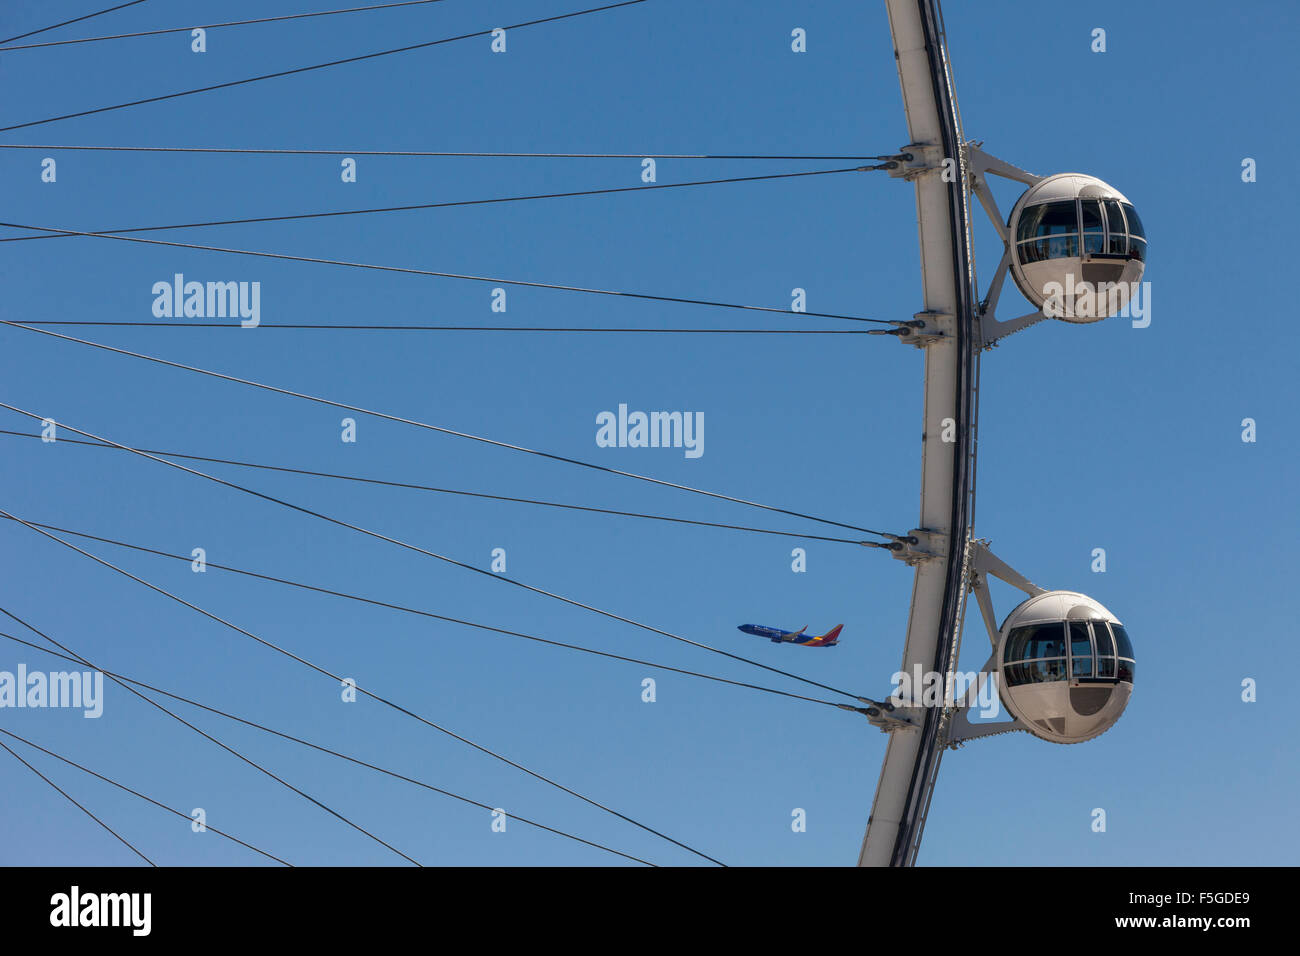 Las Vegas, Nevada.  High Roller, Airplane in Background.  The High Roller is the world's tallest observation wheel as of 2015. Stock Photo